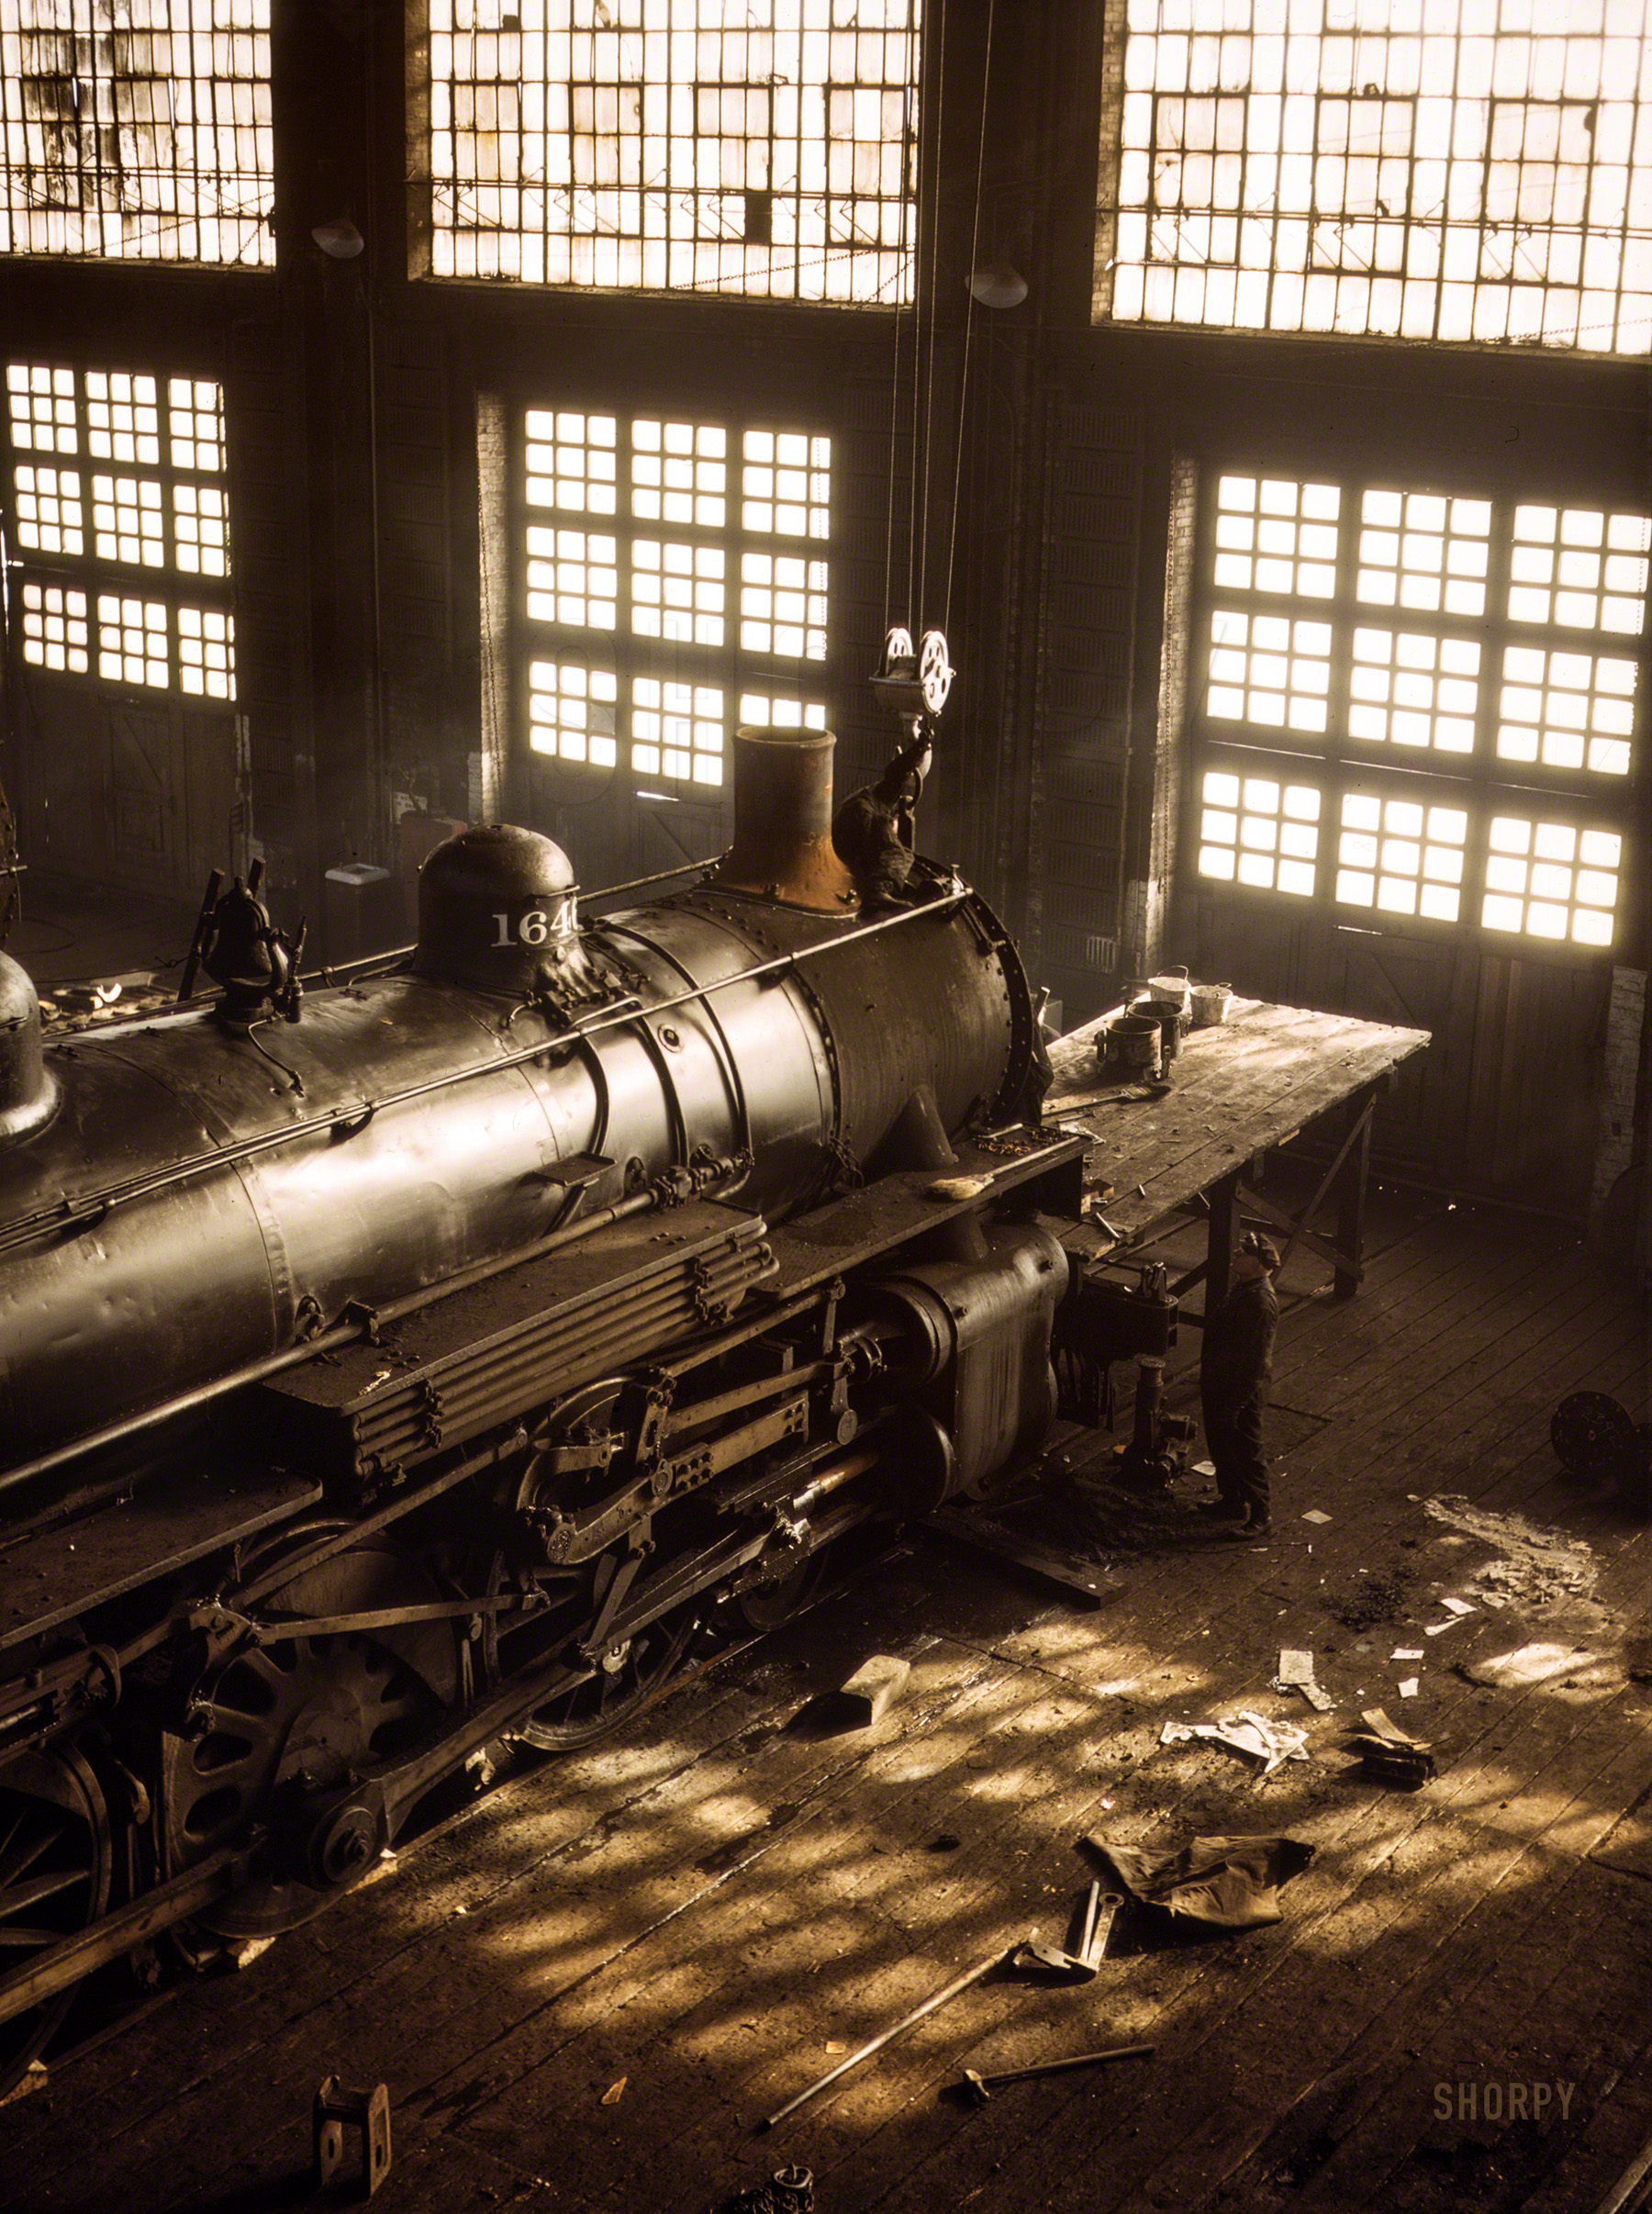 &nbsp; &nbsp; &nbsp; &nbsp; Back to the days of the blacksmith: The only tools seen here are two hammers, a wrench and a broom.
December 1942. "Working on a locomotive at the 40th Street Shops, Chicago & North Western R.R." Kodachrome transparency by Jack Delano. View full size.